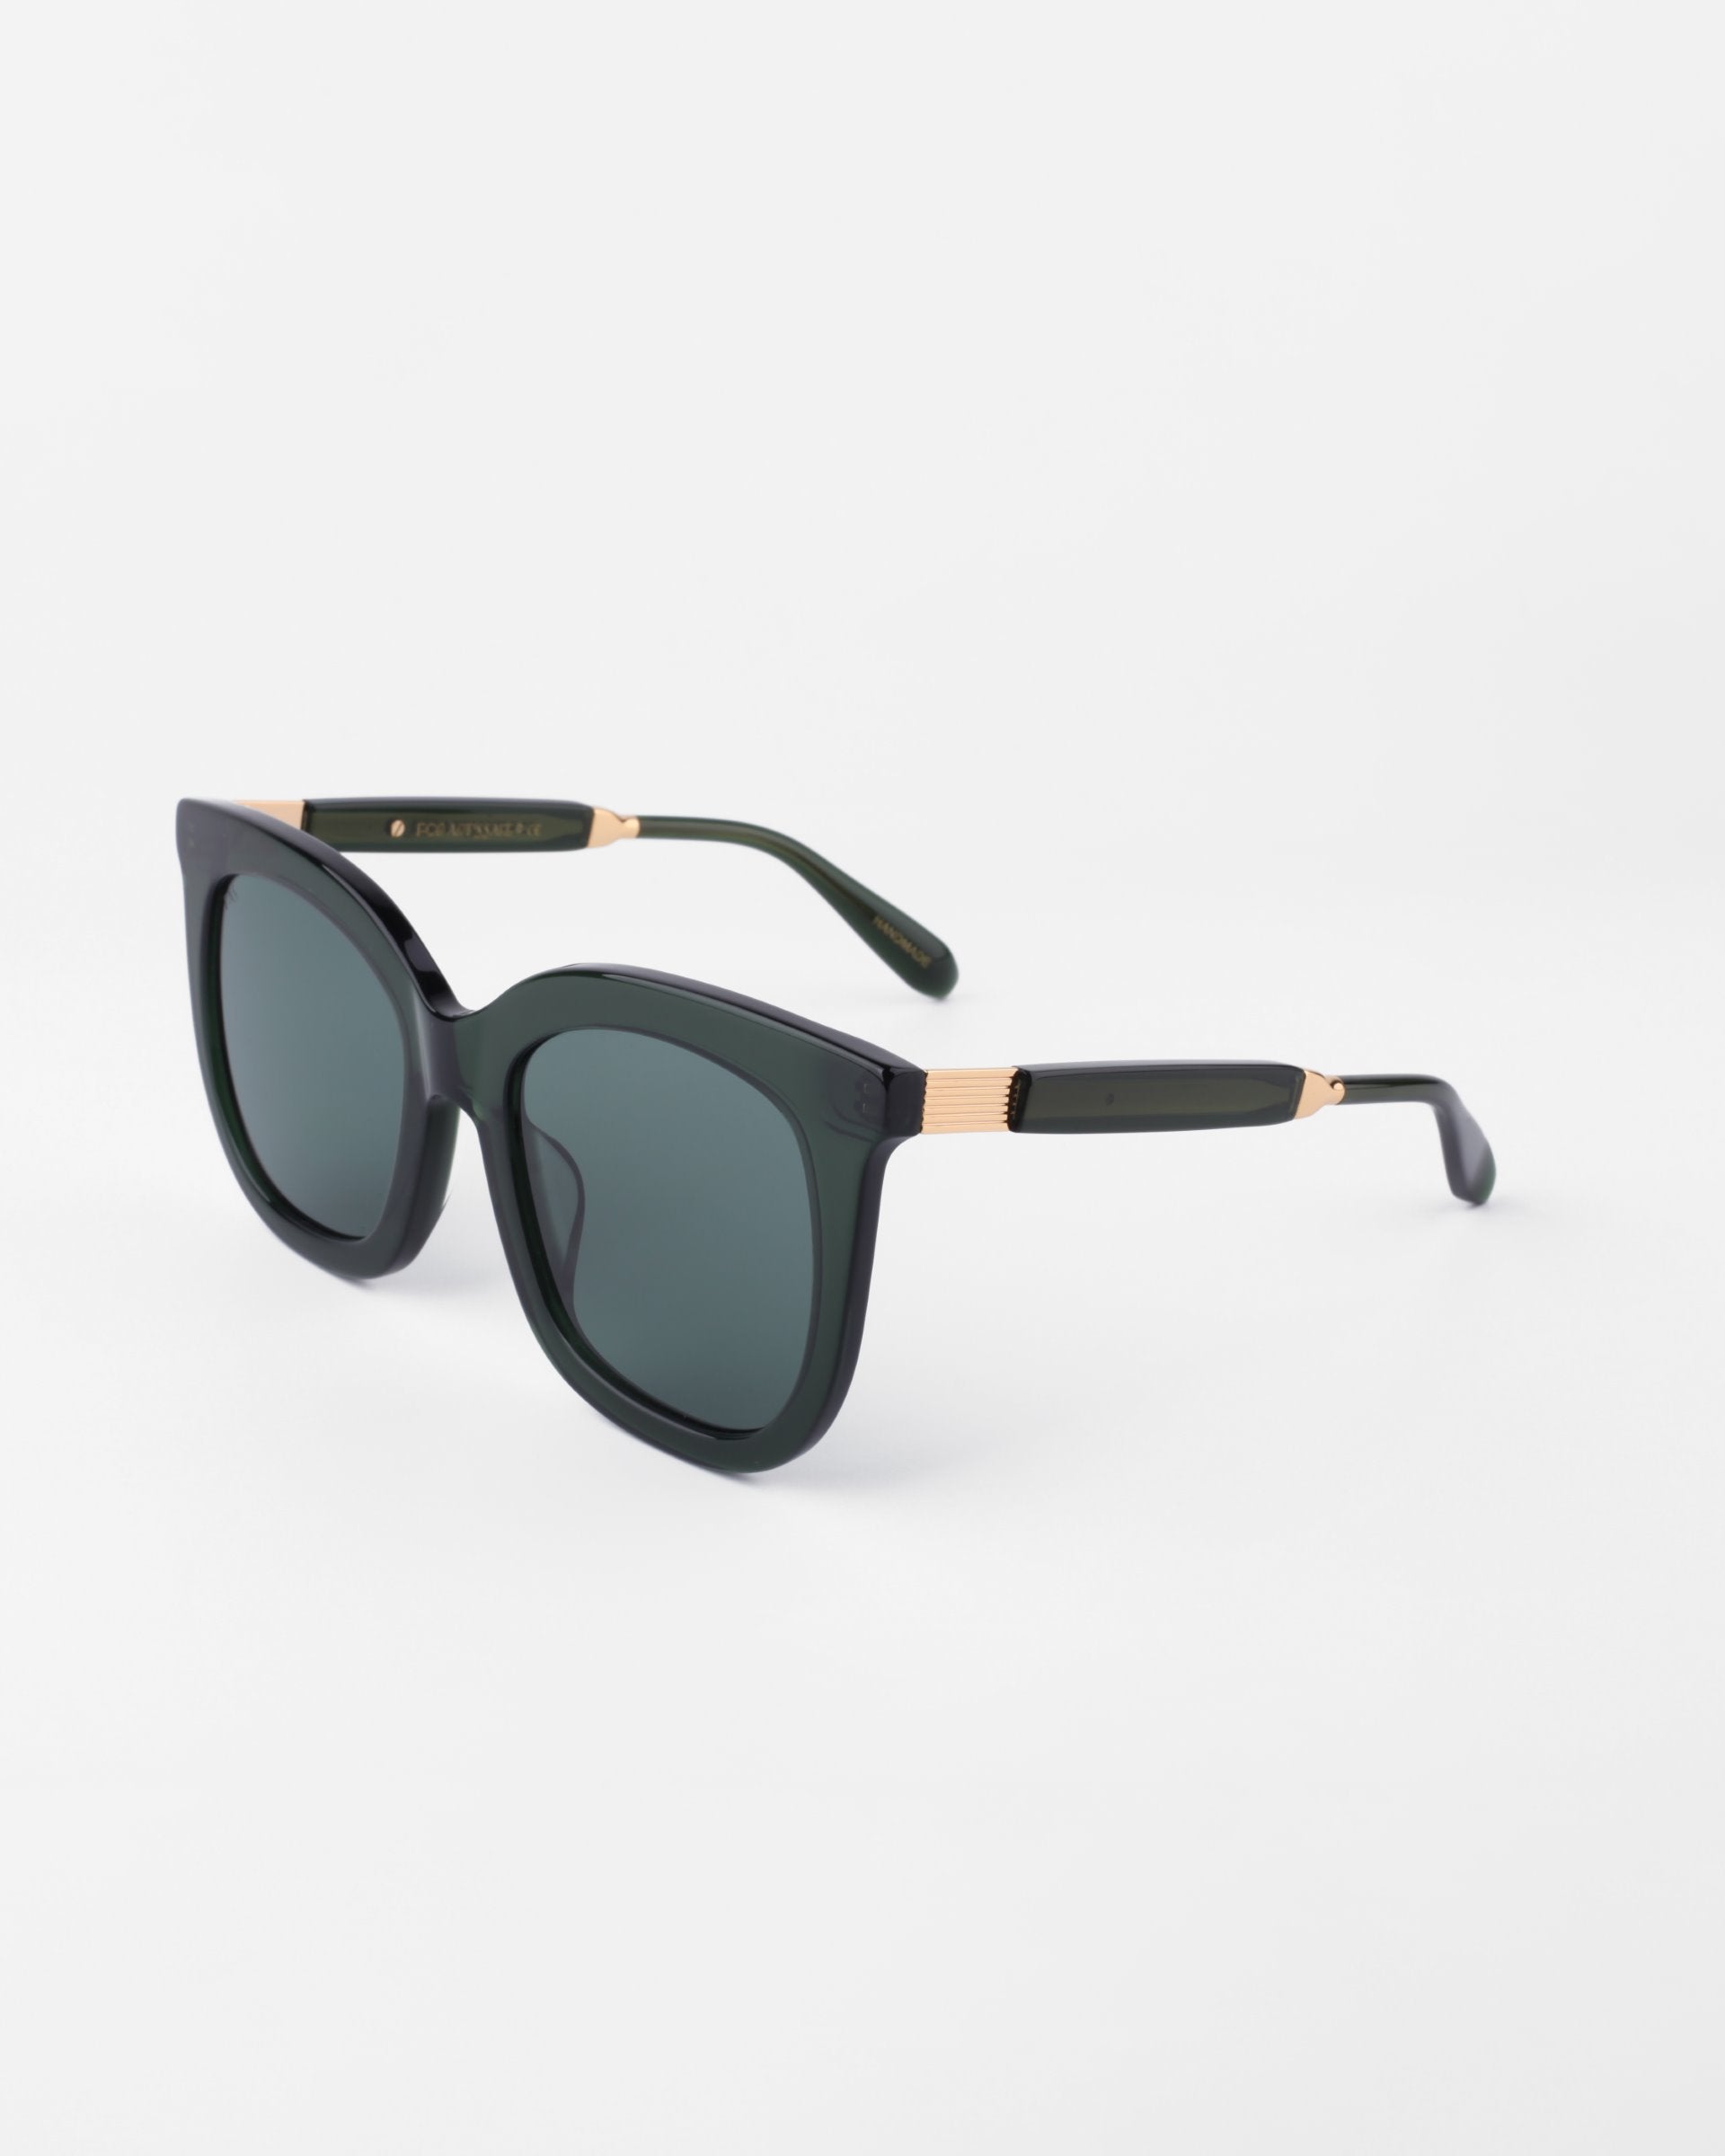 A pair of stylish black Riverside sunglasses by For Art&#39;s Sake® featuring a square frame design with dark, shatter-resistant lenses and gold-plated detailing on the temples. The background is plain white, emphasizing the sleek and modern design of the eyewear.